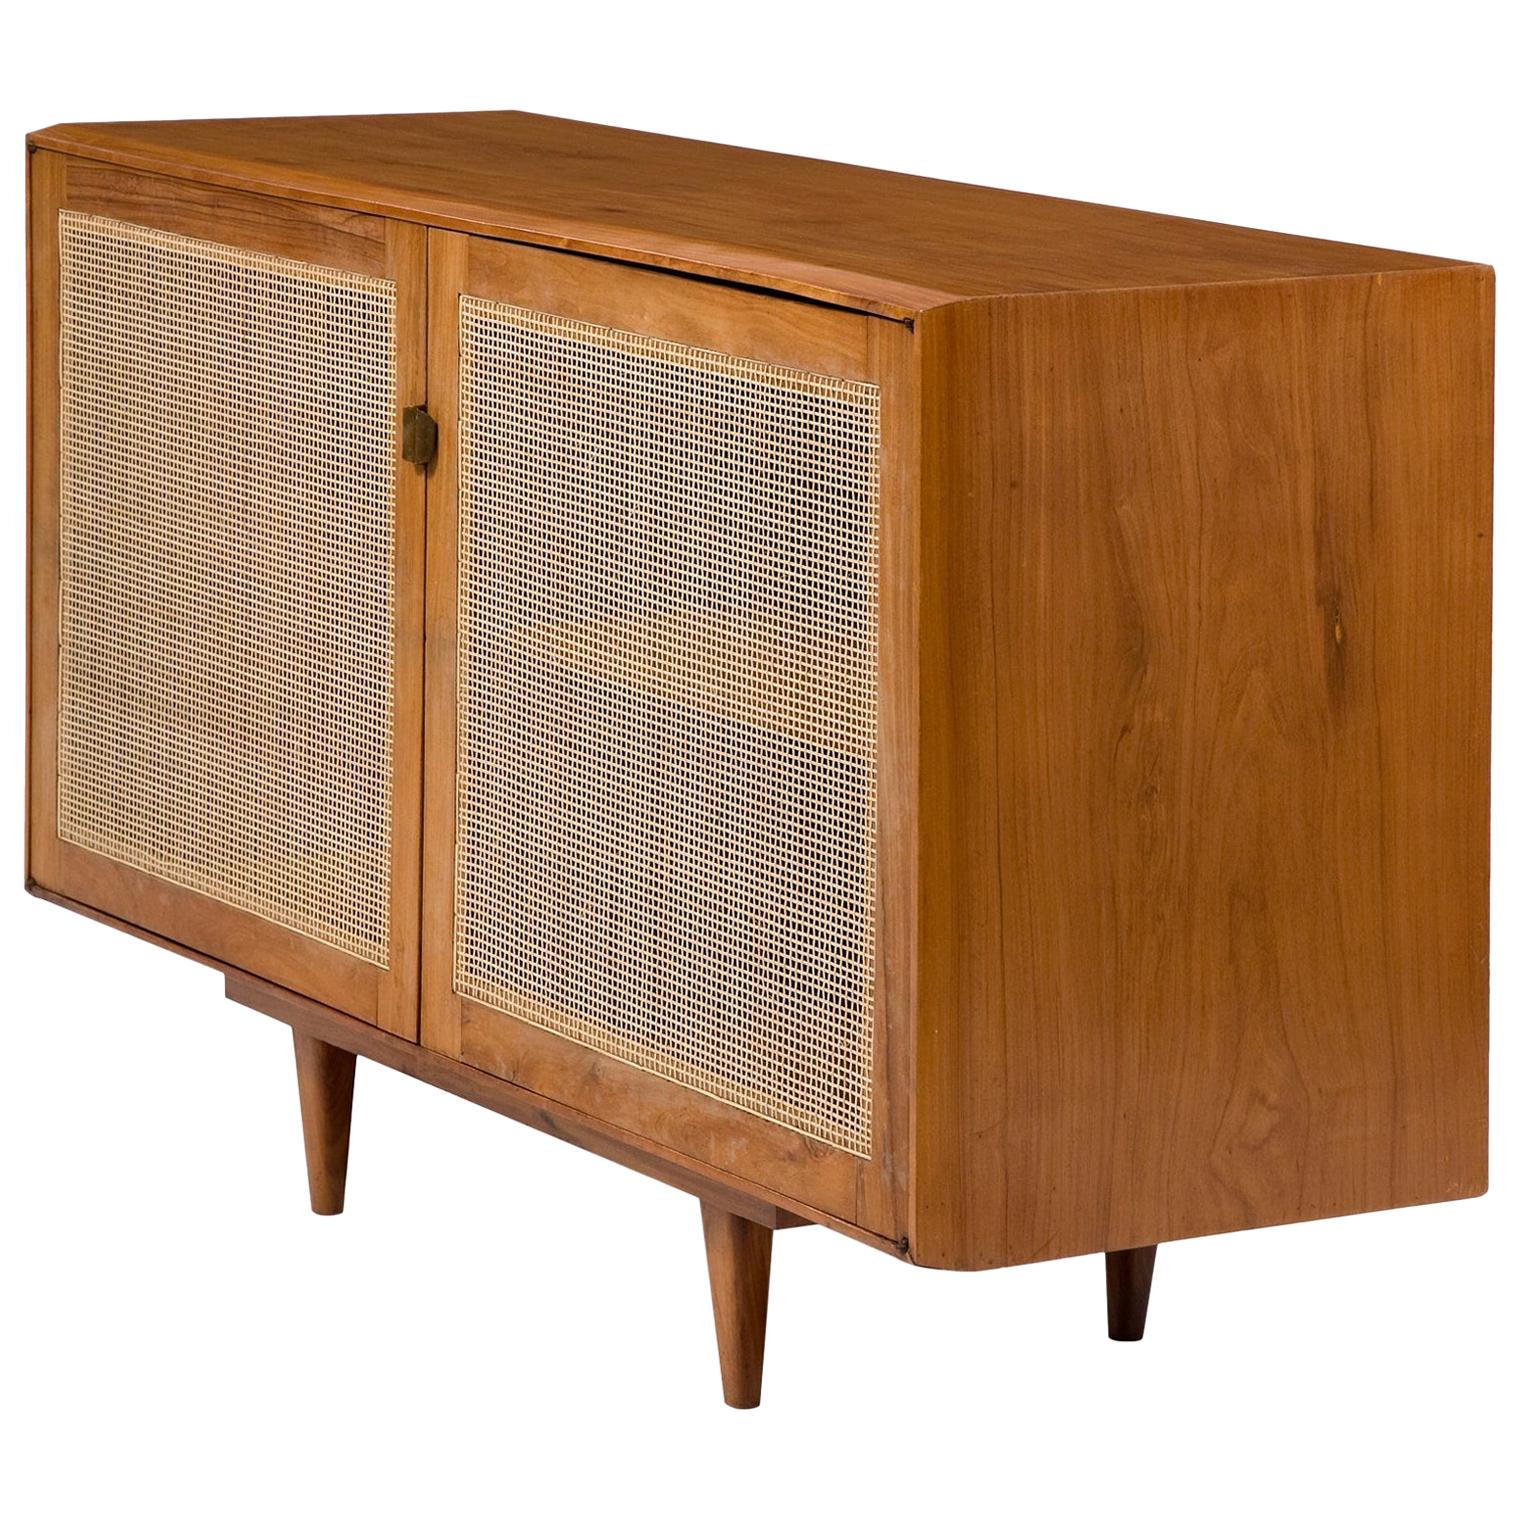 Credenza in Caviona Wood with Cane Front by Martin Eisler for Forma, 1960